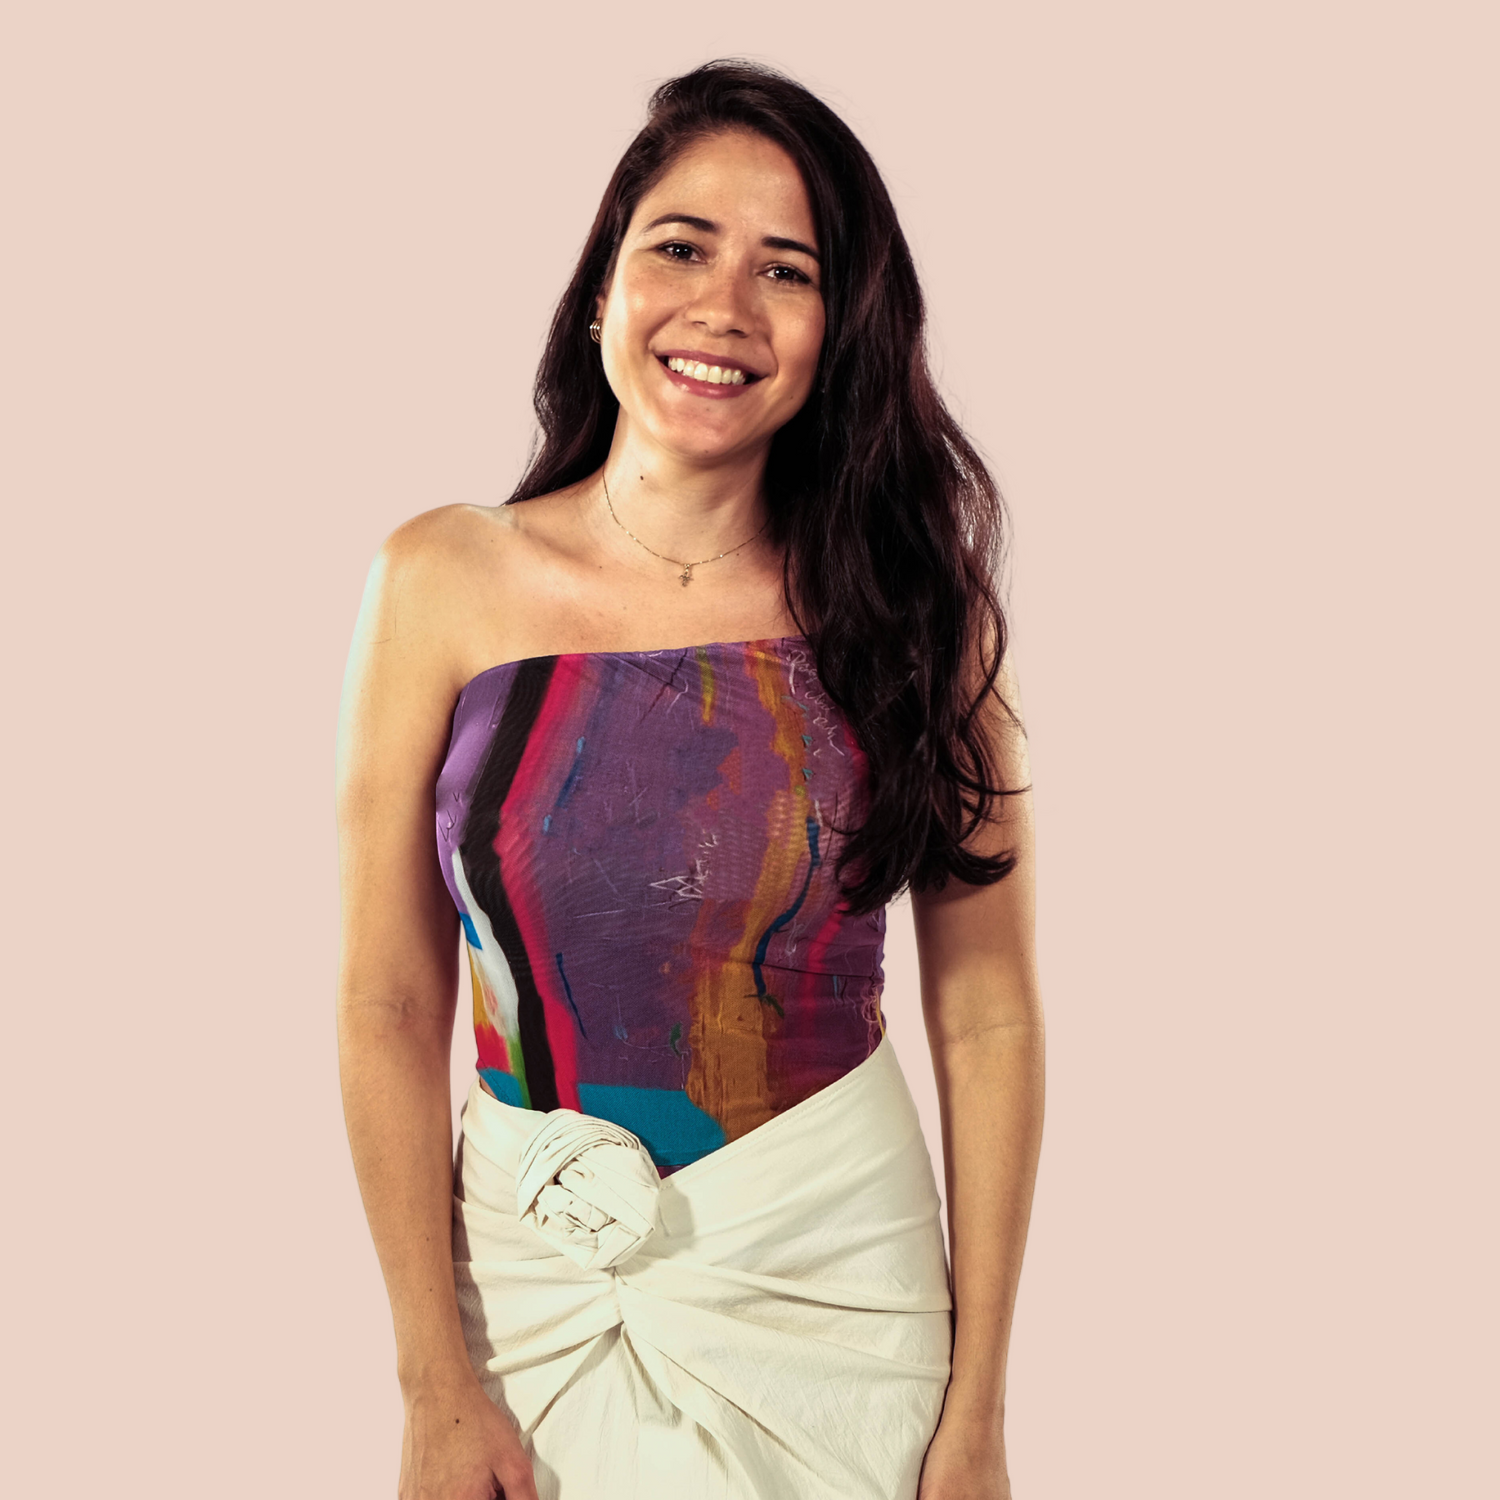 A Hispanic woman smiling. The woman has long dark hair and tan skin color. She is wearing a multicolor top and a beige color skirt. The text next to the image states "Proudly woman owned learn about our co-founder's journey to discover matcha". Greenboxed is co founded and led by a latin / latinx woman minority own and it is a wellness brand owned by a woman.  The brand is now located in Pittsburgh, PA. Proudly providing organic unsweetened matcha. 